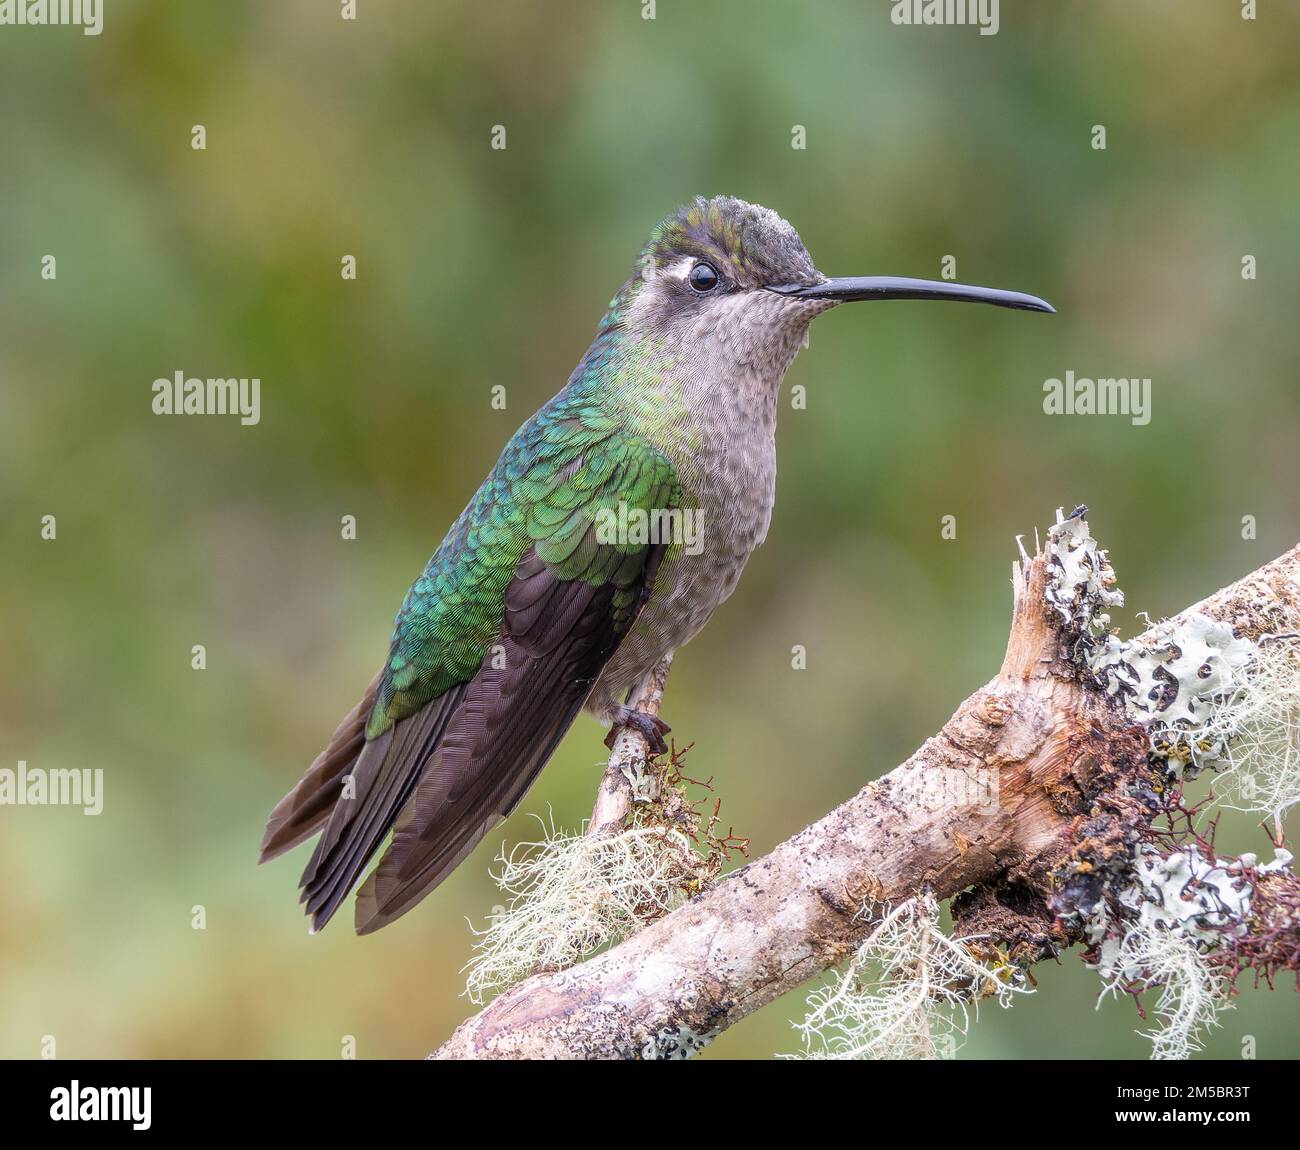 a talamanca hummingbird perched on a branch at a garden in costa rica Stock Photo